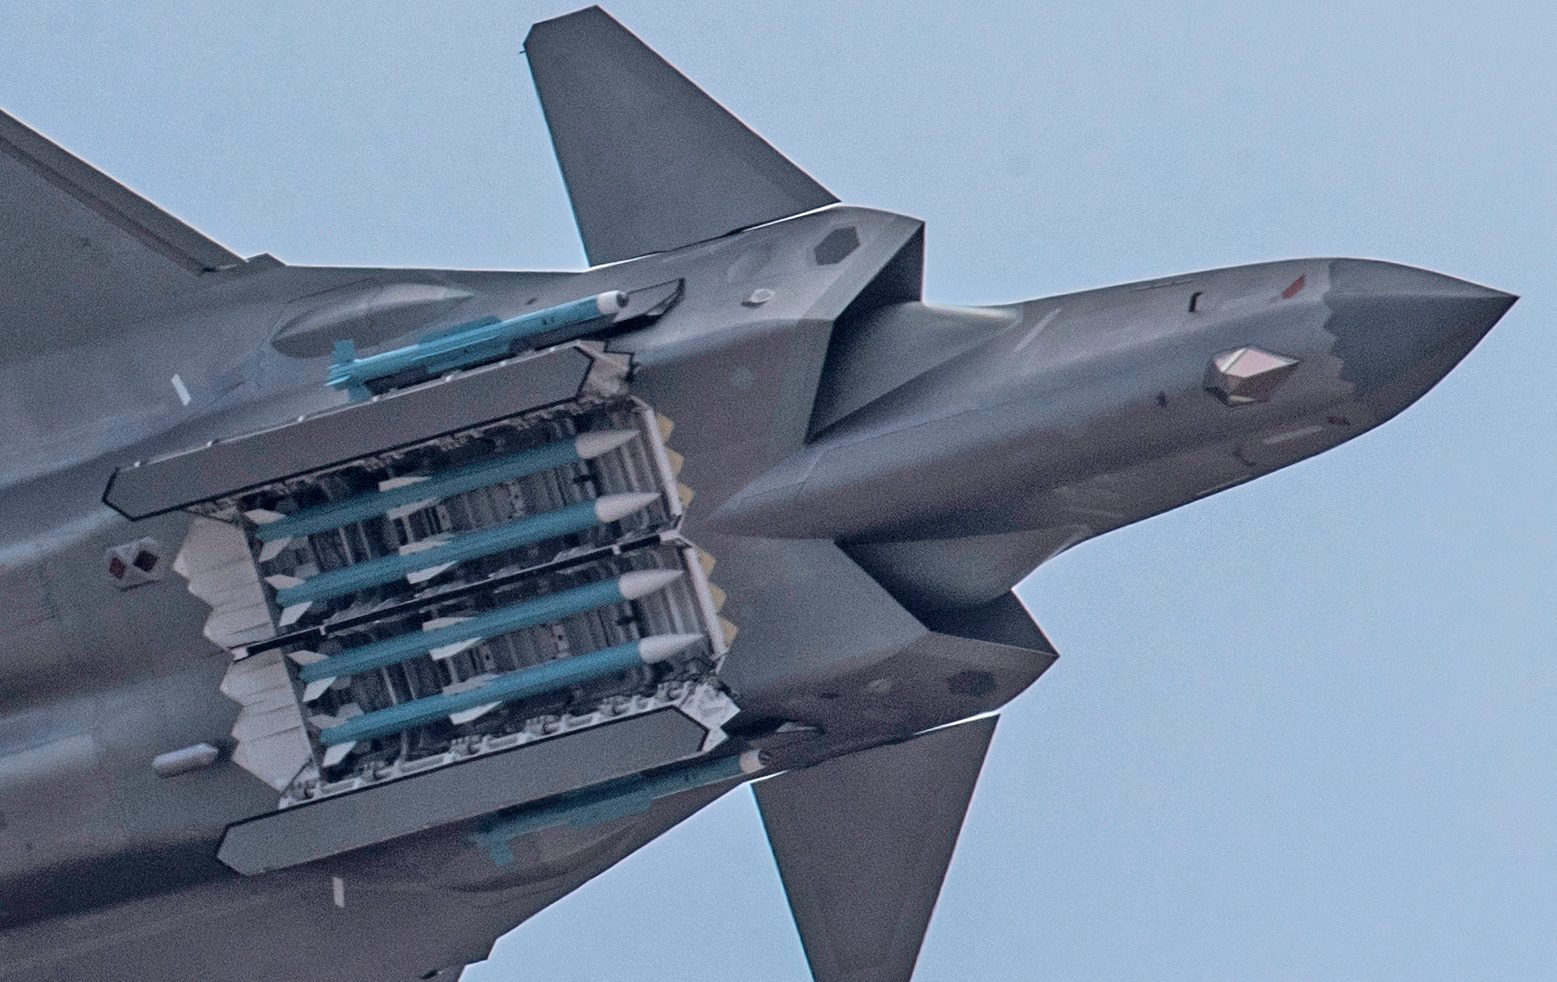 chinese-j-20-stealth-fighter-weapons-bay-zhuhai-2018-e1542745274193.jpg